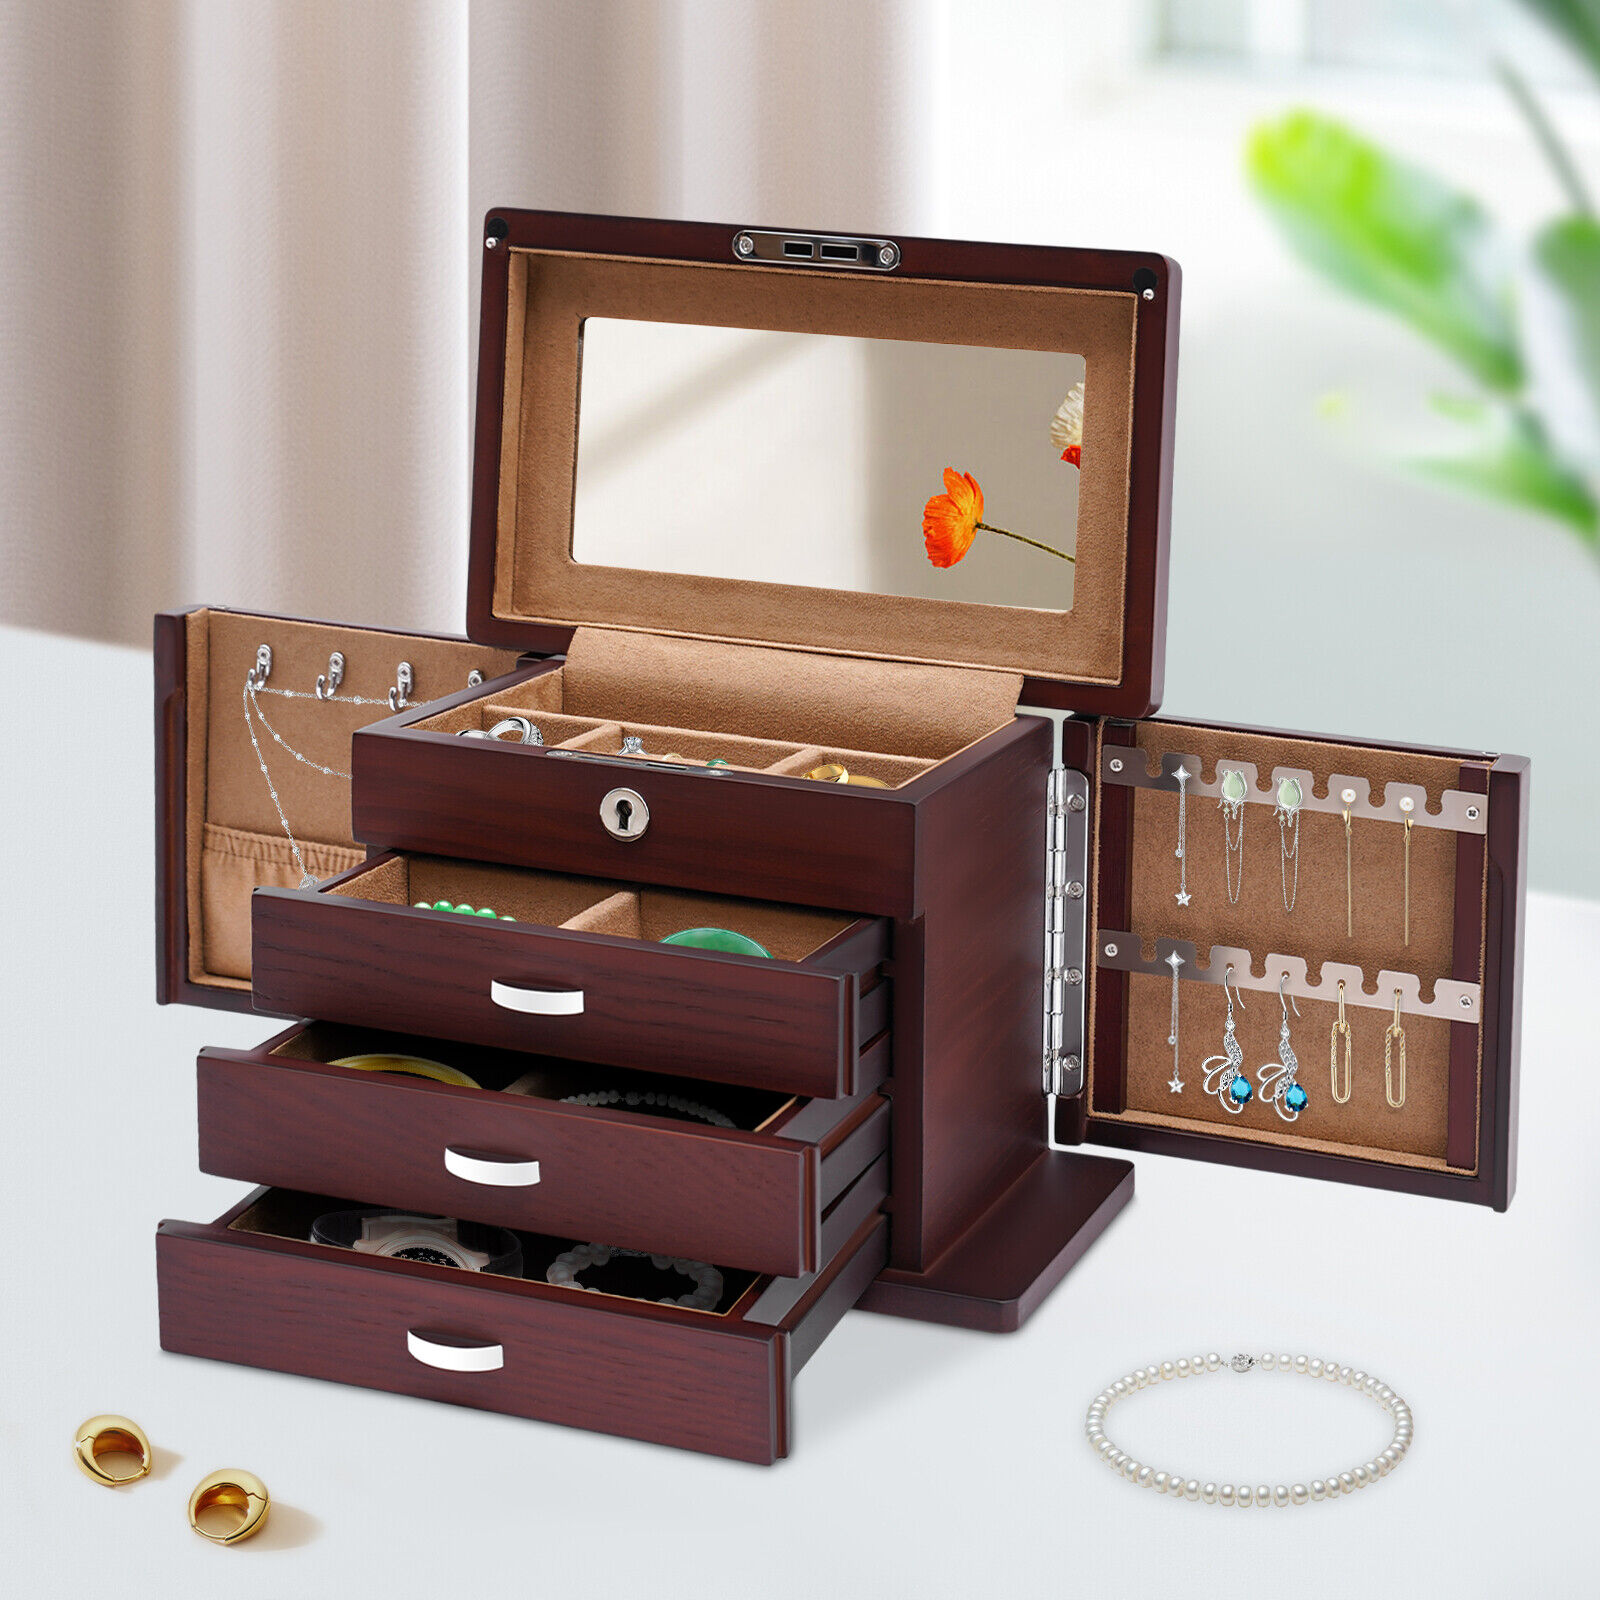 4-Layer Large Wooden Jewelry Box Large Wooden Jewelry Box with Drawers